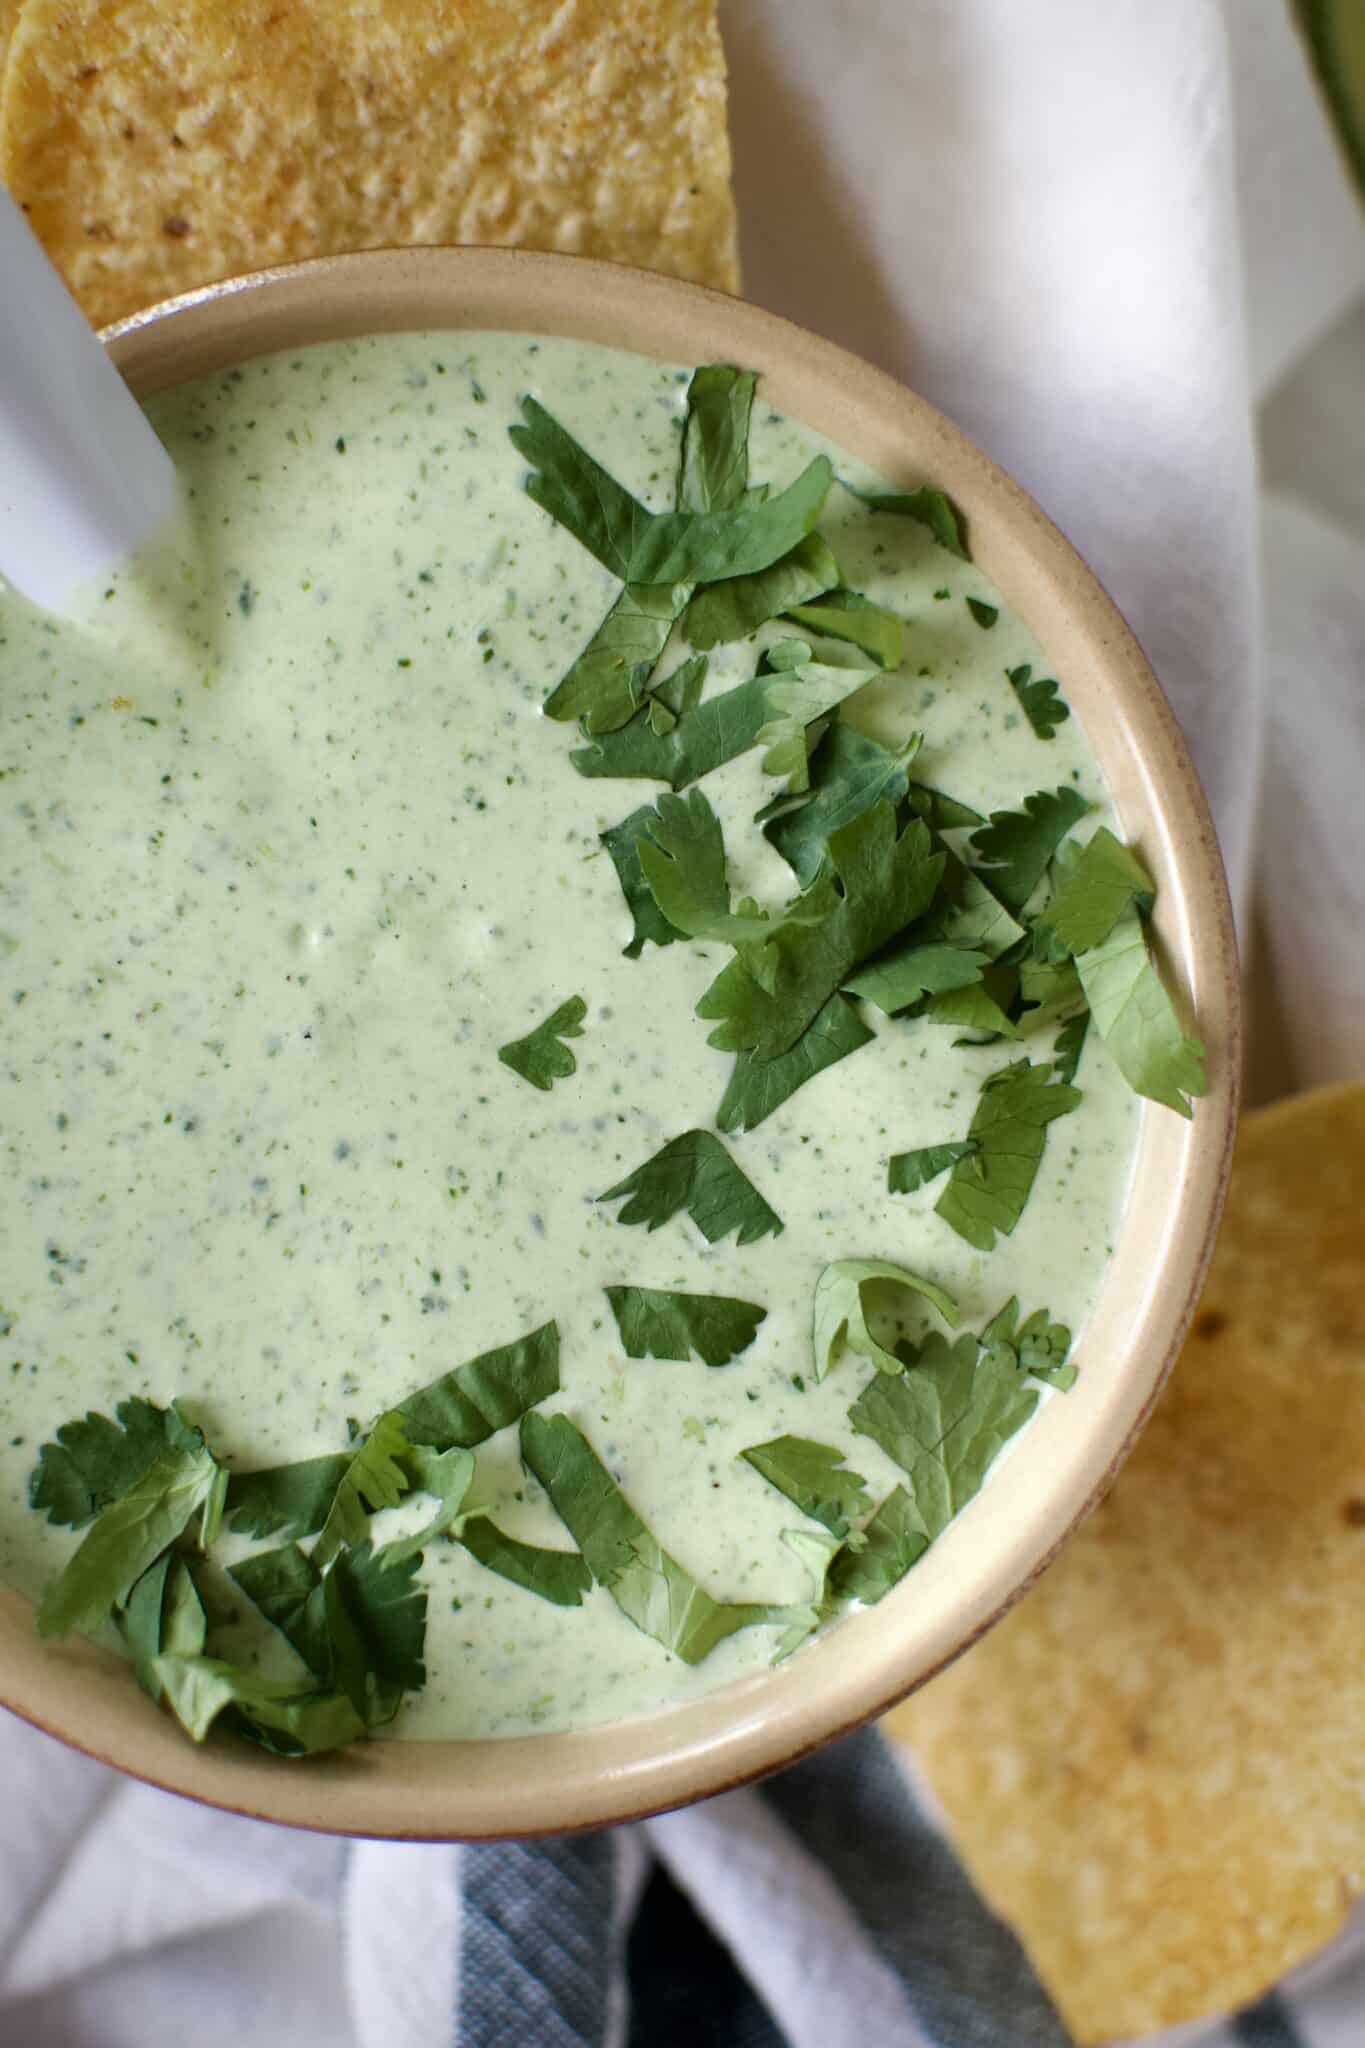 Creamy Jalapeño Dip served with chips.